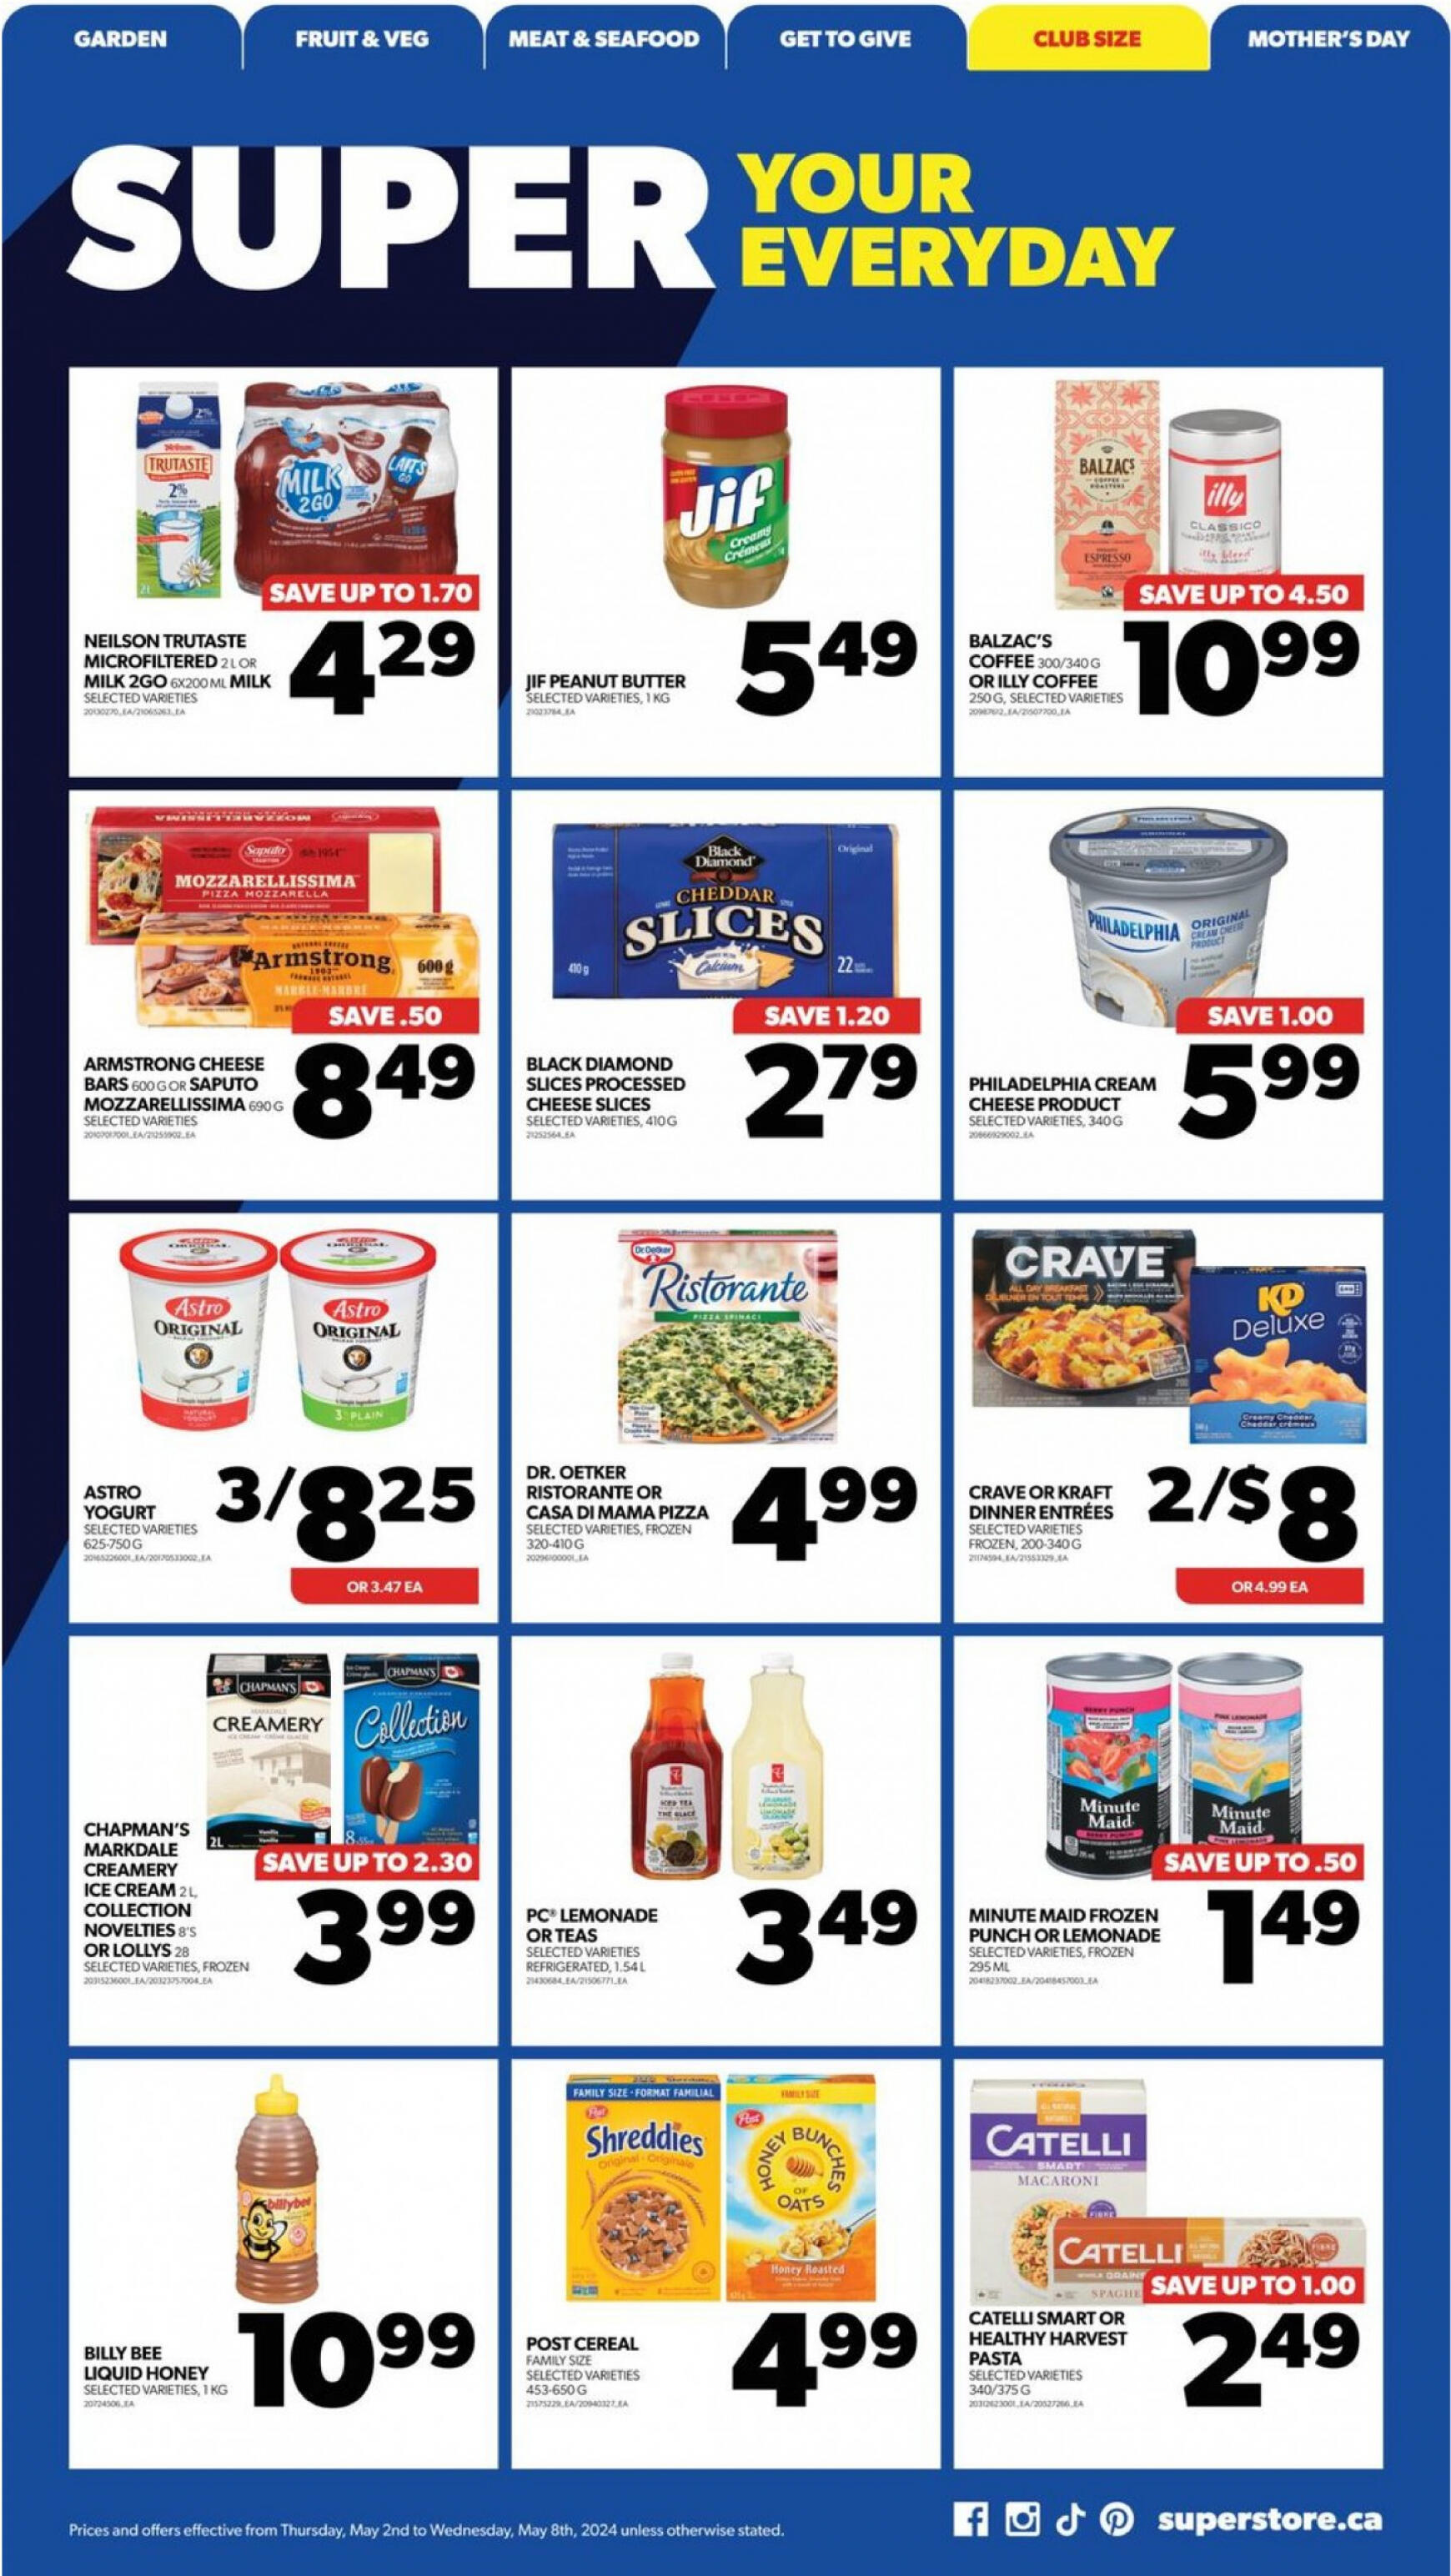 real-canadian-superstore - Real Canadian Superstore flyer current 02.05. - 08.05. - page: 19